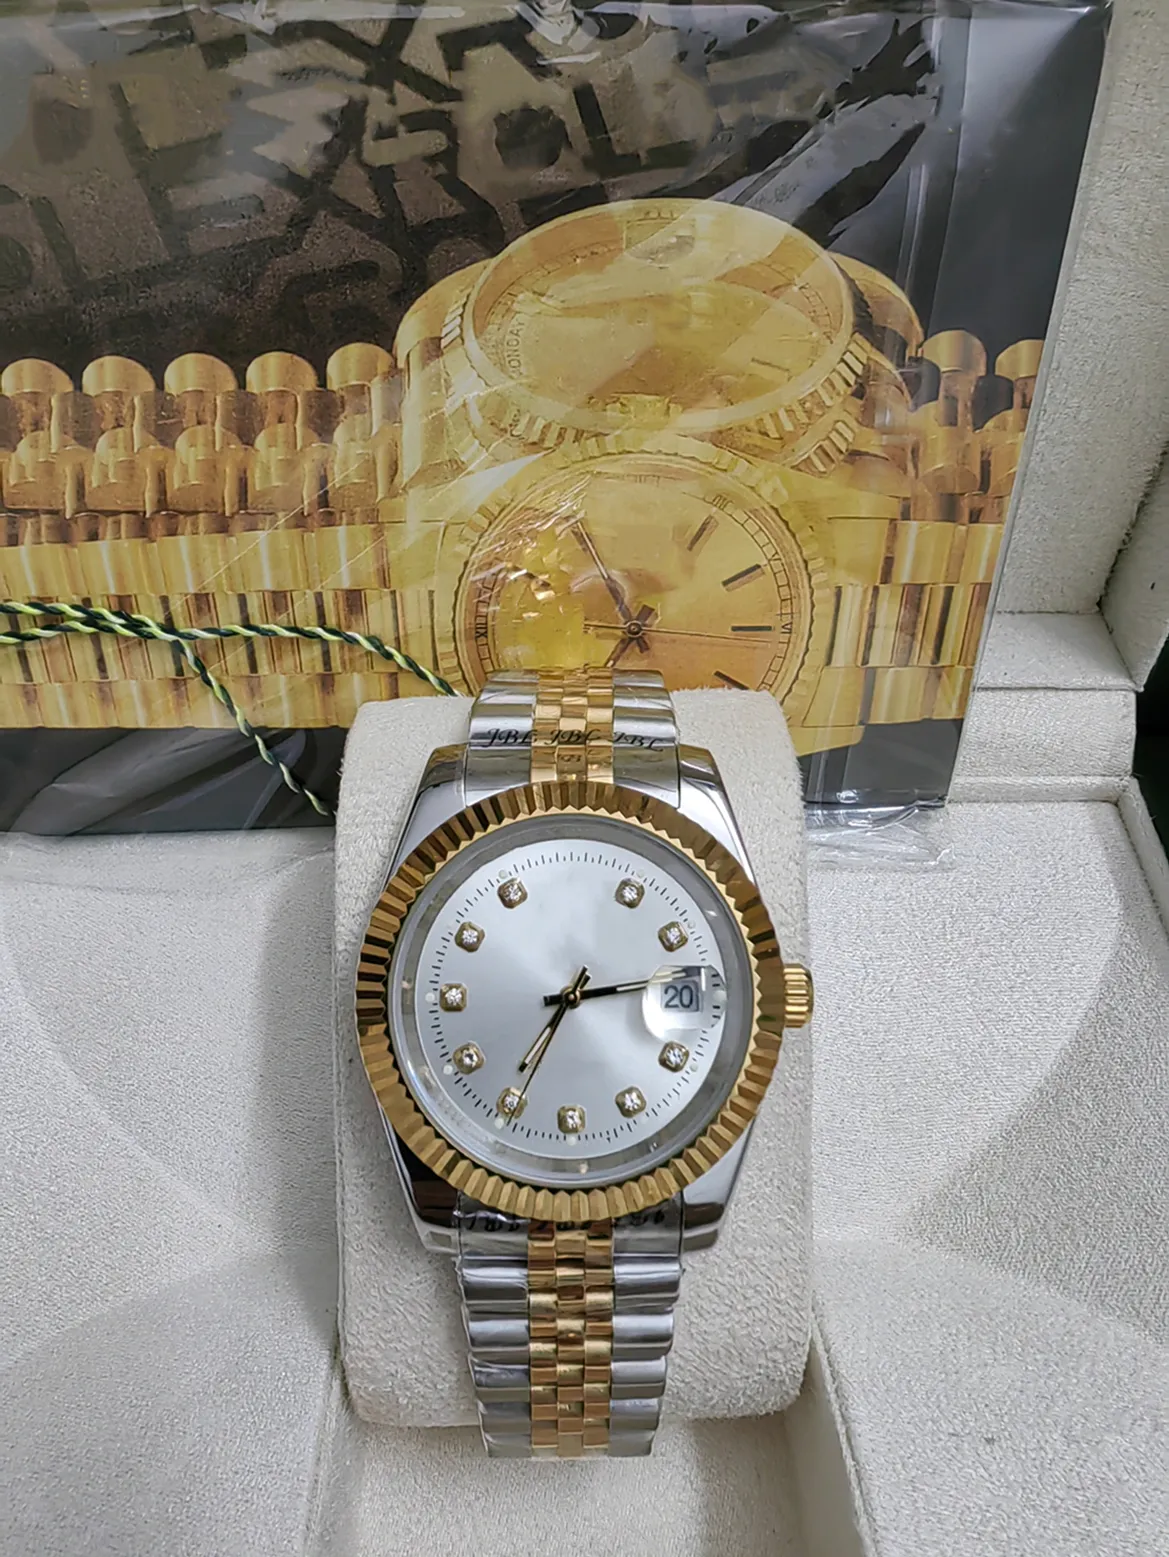 With original box High-Quality Watch 41mm President Datejust 126234 Sapphire Glass Asia 2813 Movement Mechanical Automatic Mens Watches 202365